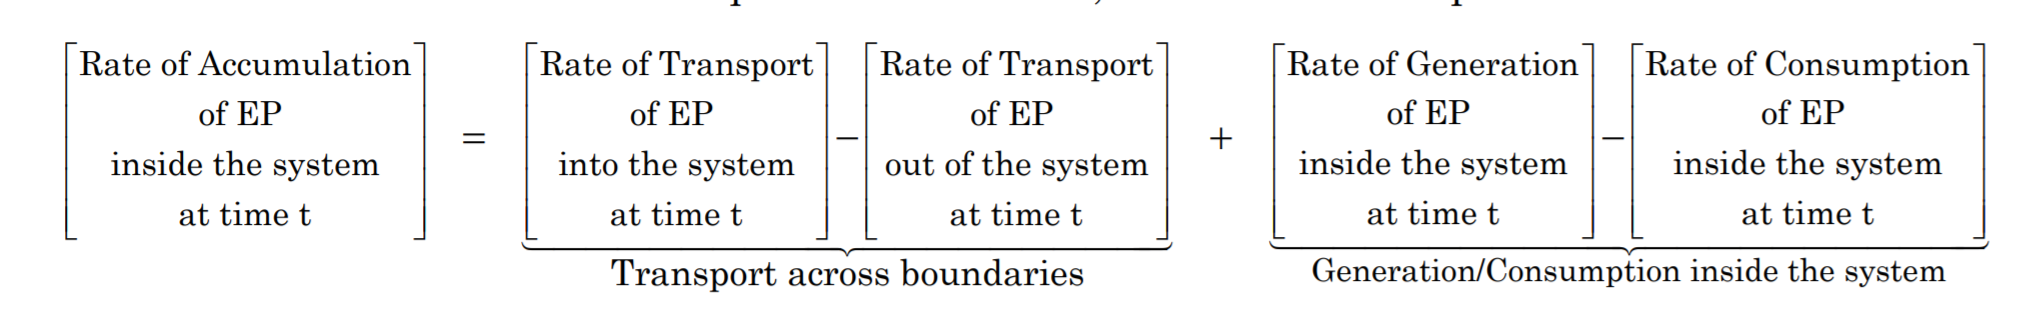 Rate of accumulation of EP inside the system at time t equals transport across boundaries minus generation/consumption inside the system, which equals rate of transport of EP into the system at t minus the rate of transport of EP out of the system at t plus the rate of generation of EP inside the system at t minus the rate of consumption of EP inside the system at t.